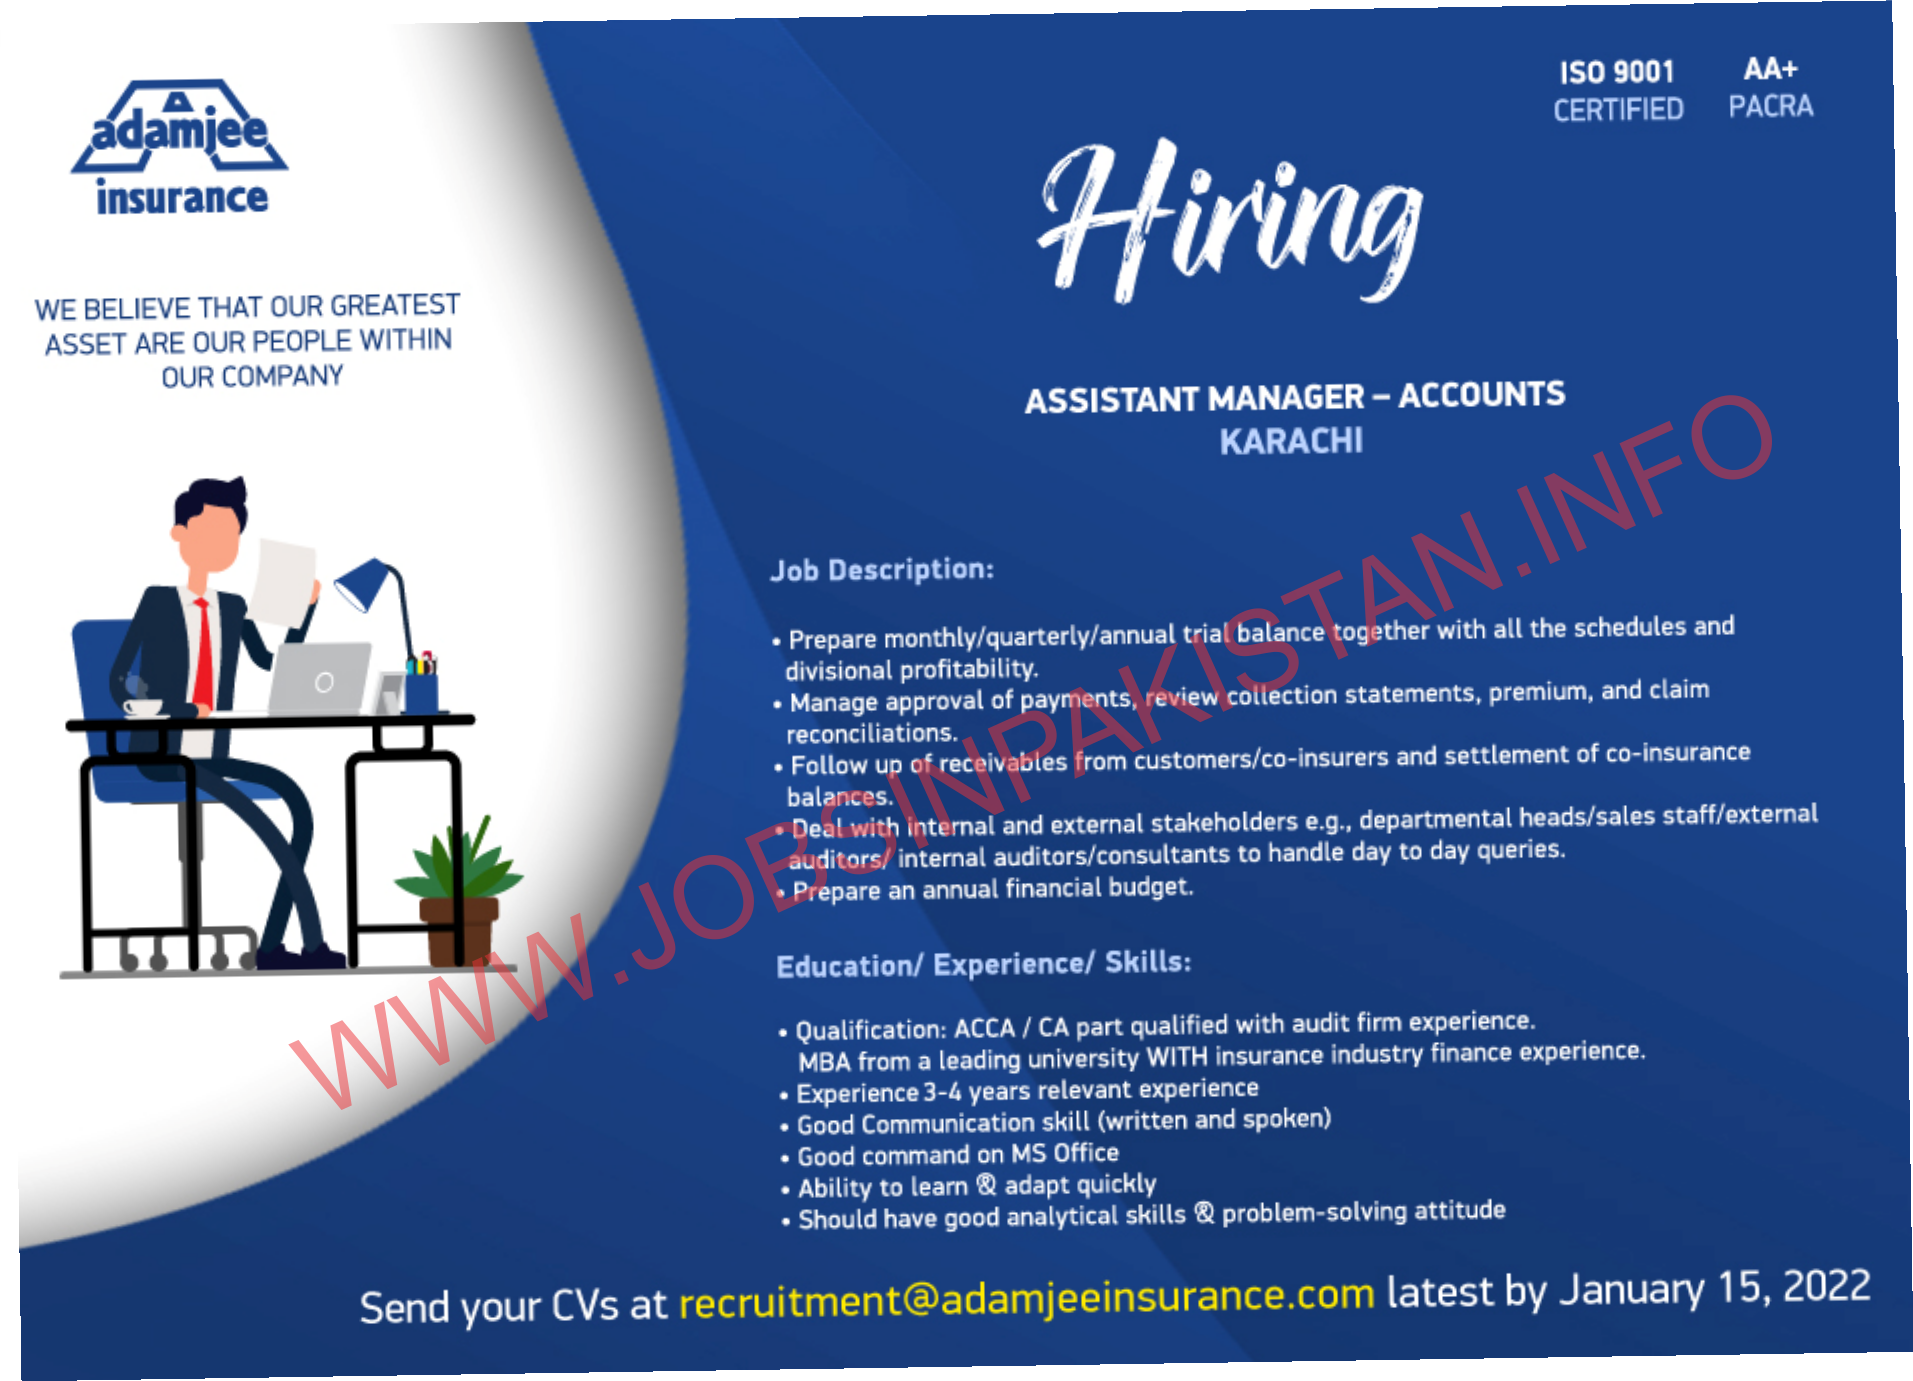 Adamjee Life Insurance Company Limited Jobs Assistant Manager Accounts